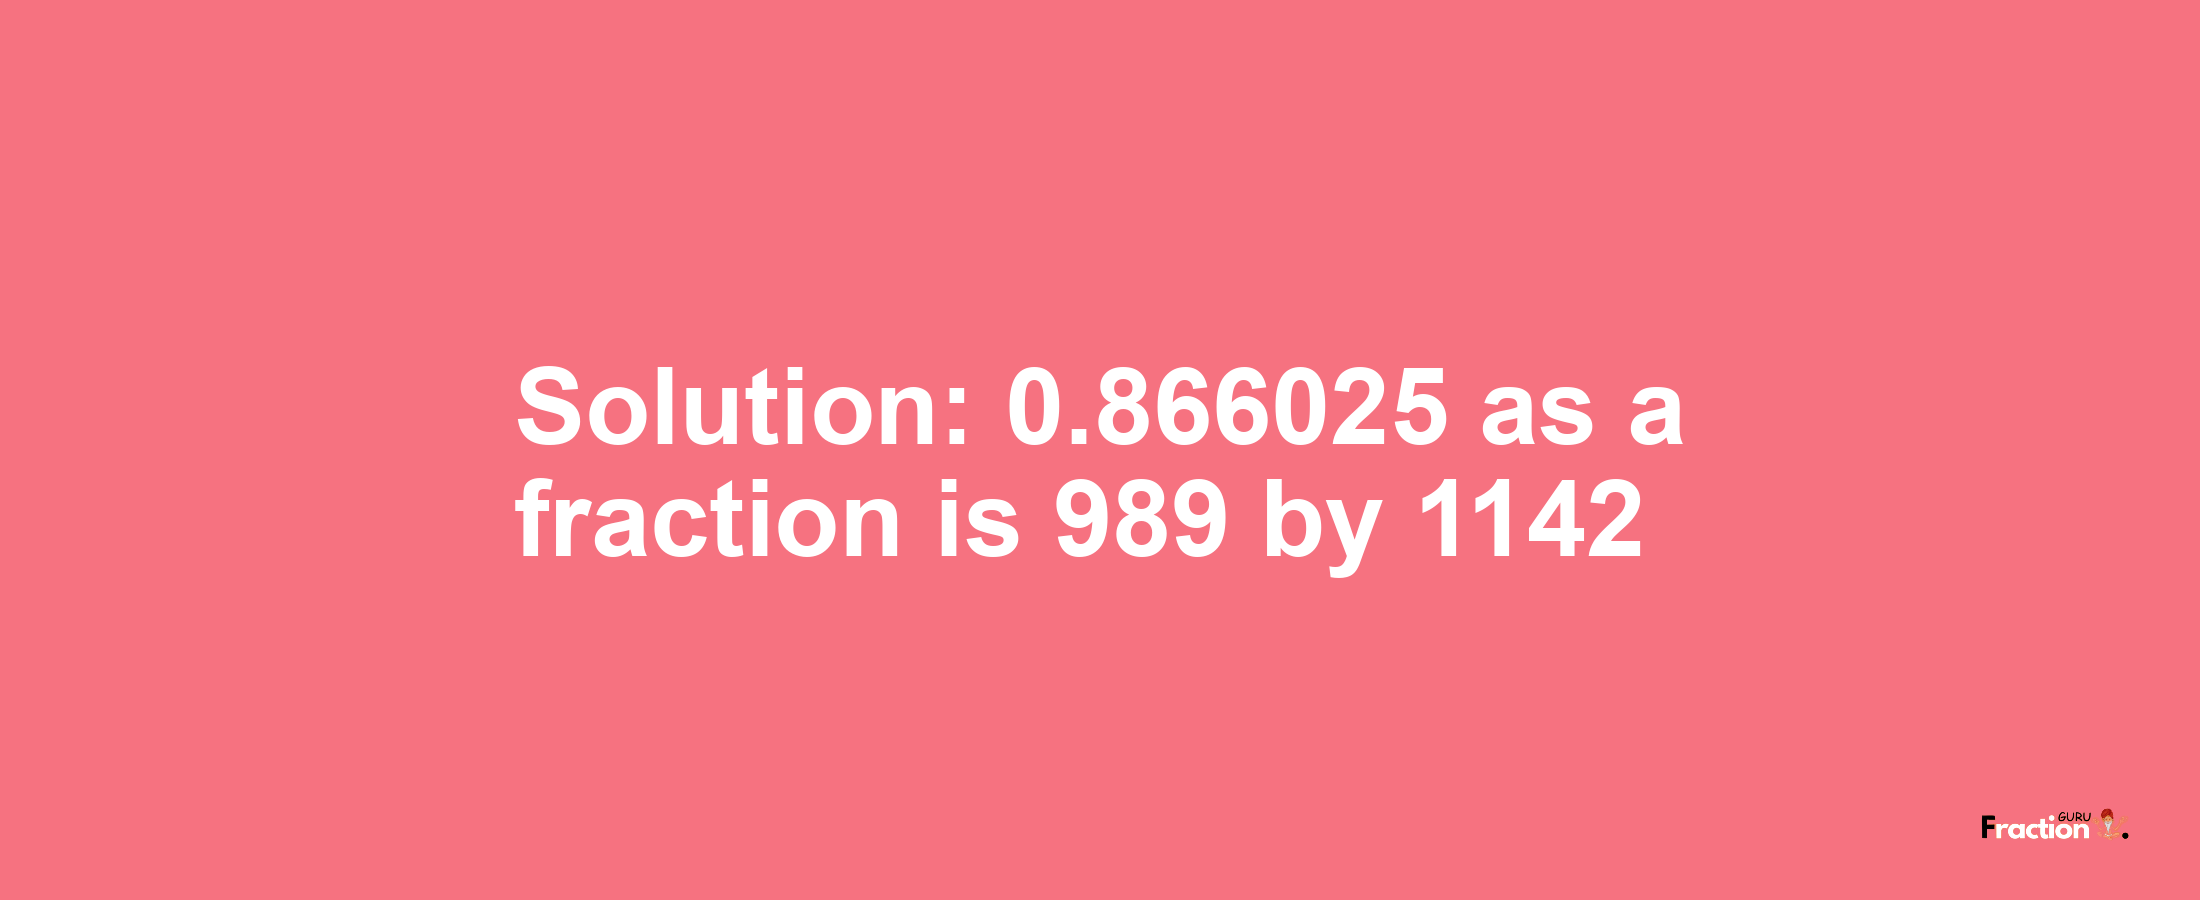 Solution:0.866025 as a fraction is 989/1142